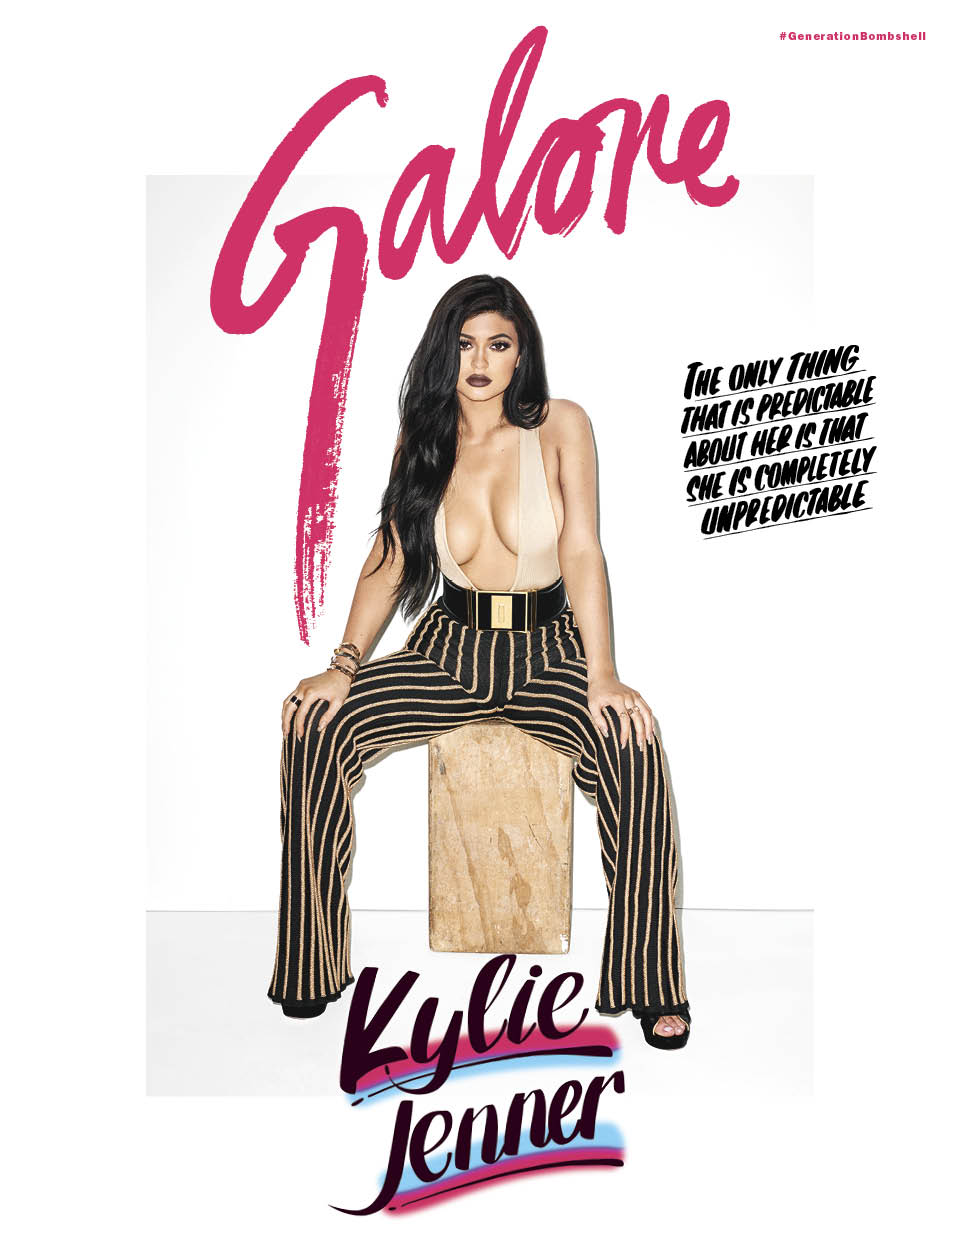 Kylie Jenner for Galore Magazine